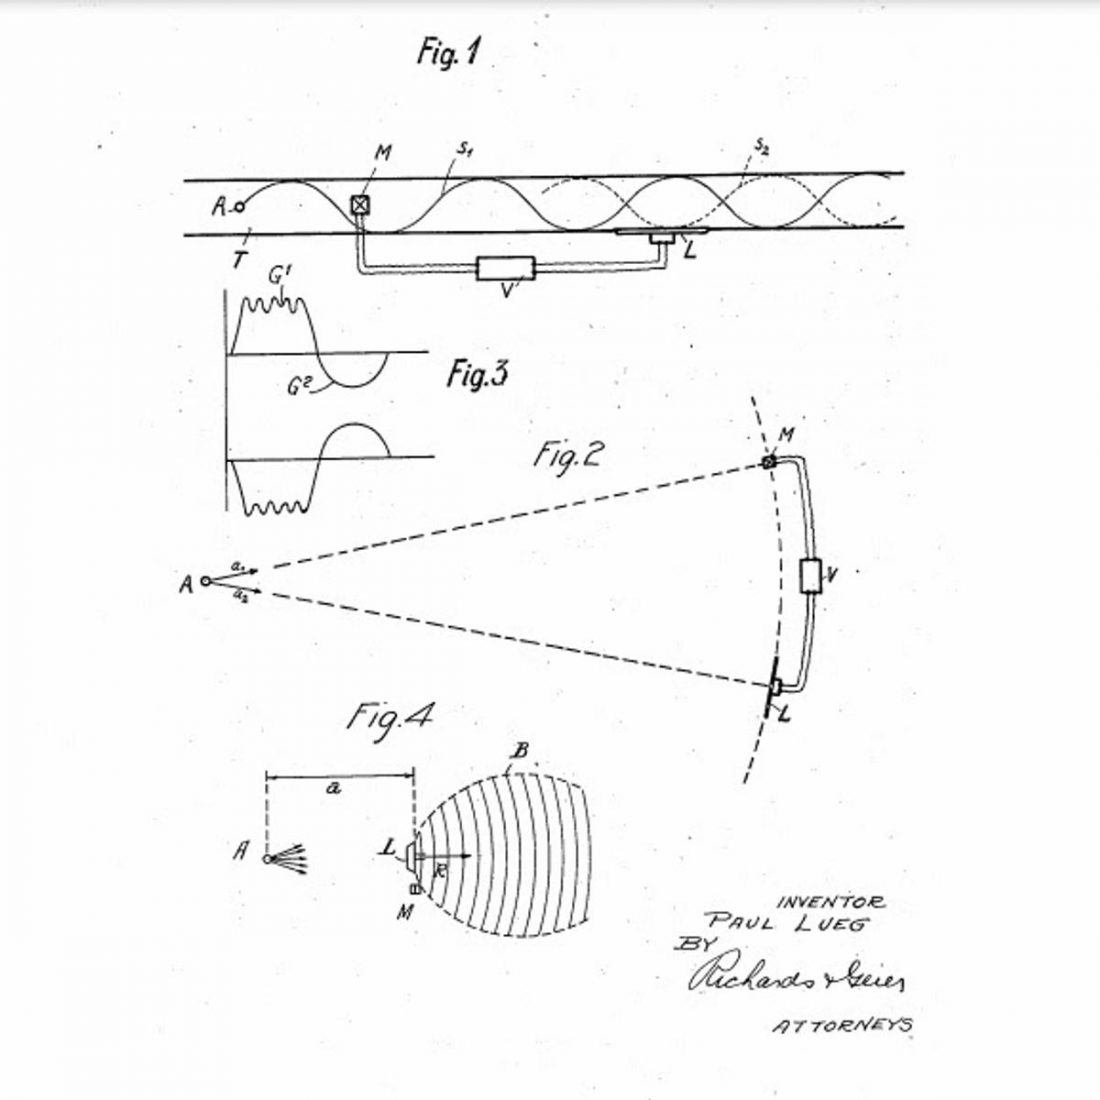 Drawings by Paul Lueg that illustrates the process of silencing sound oscillations (From: https://patentimages.storage.googleapis.com/)